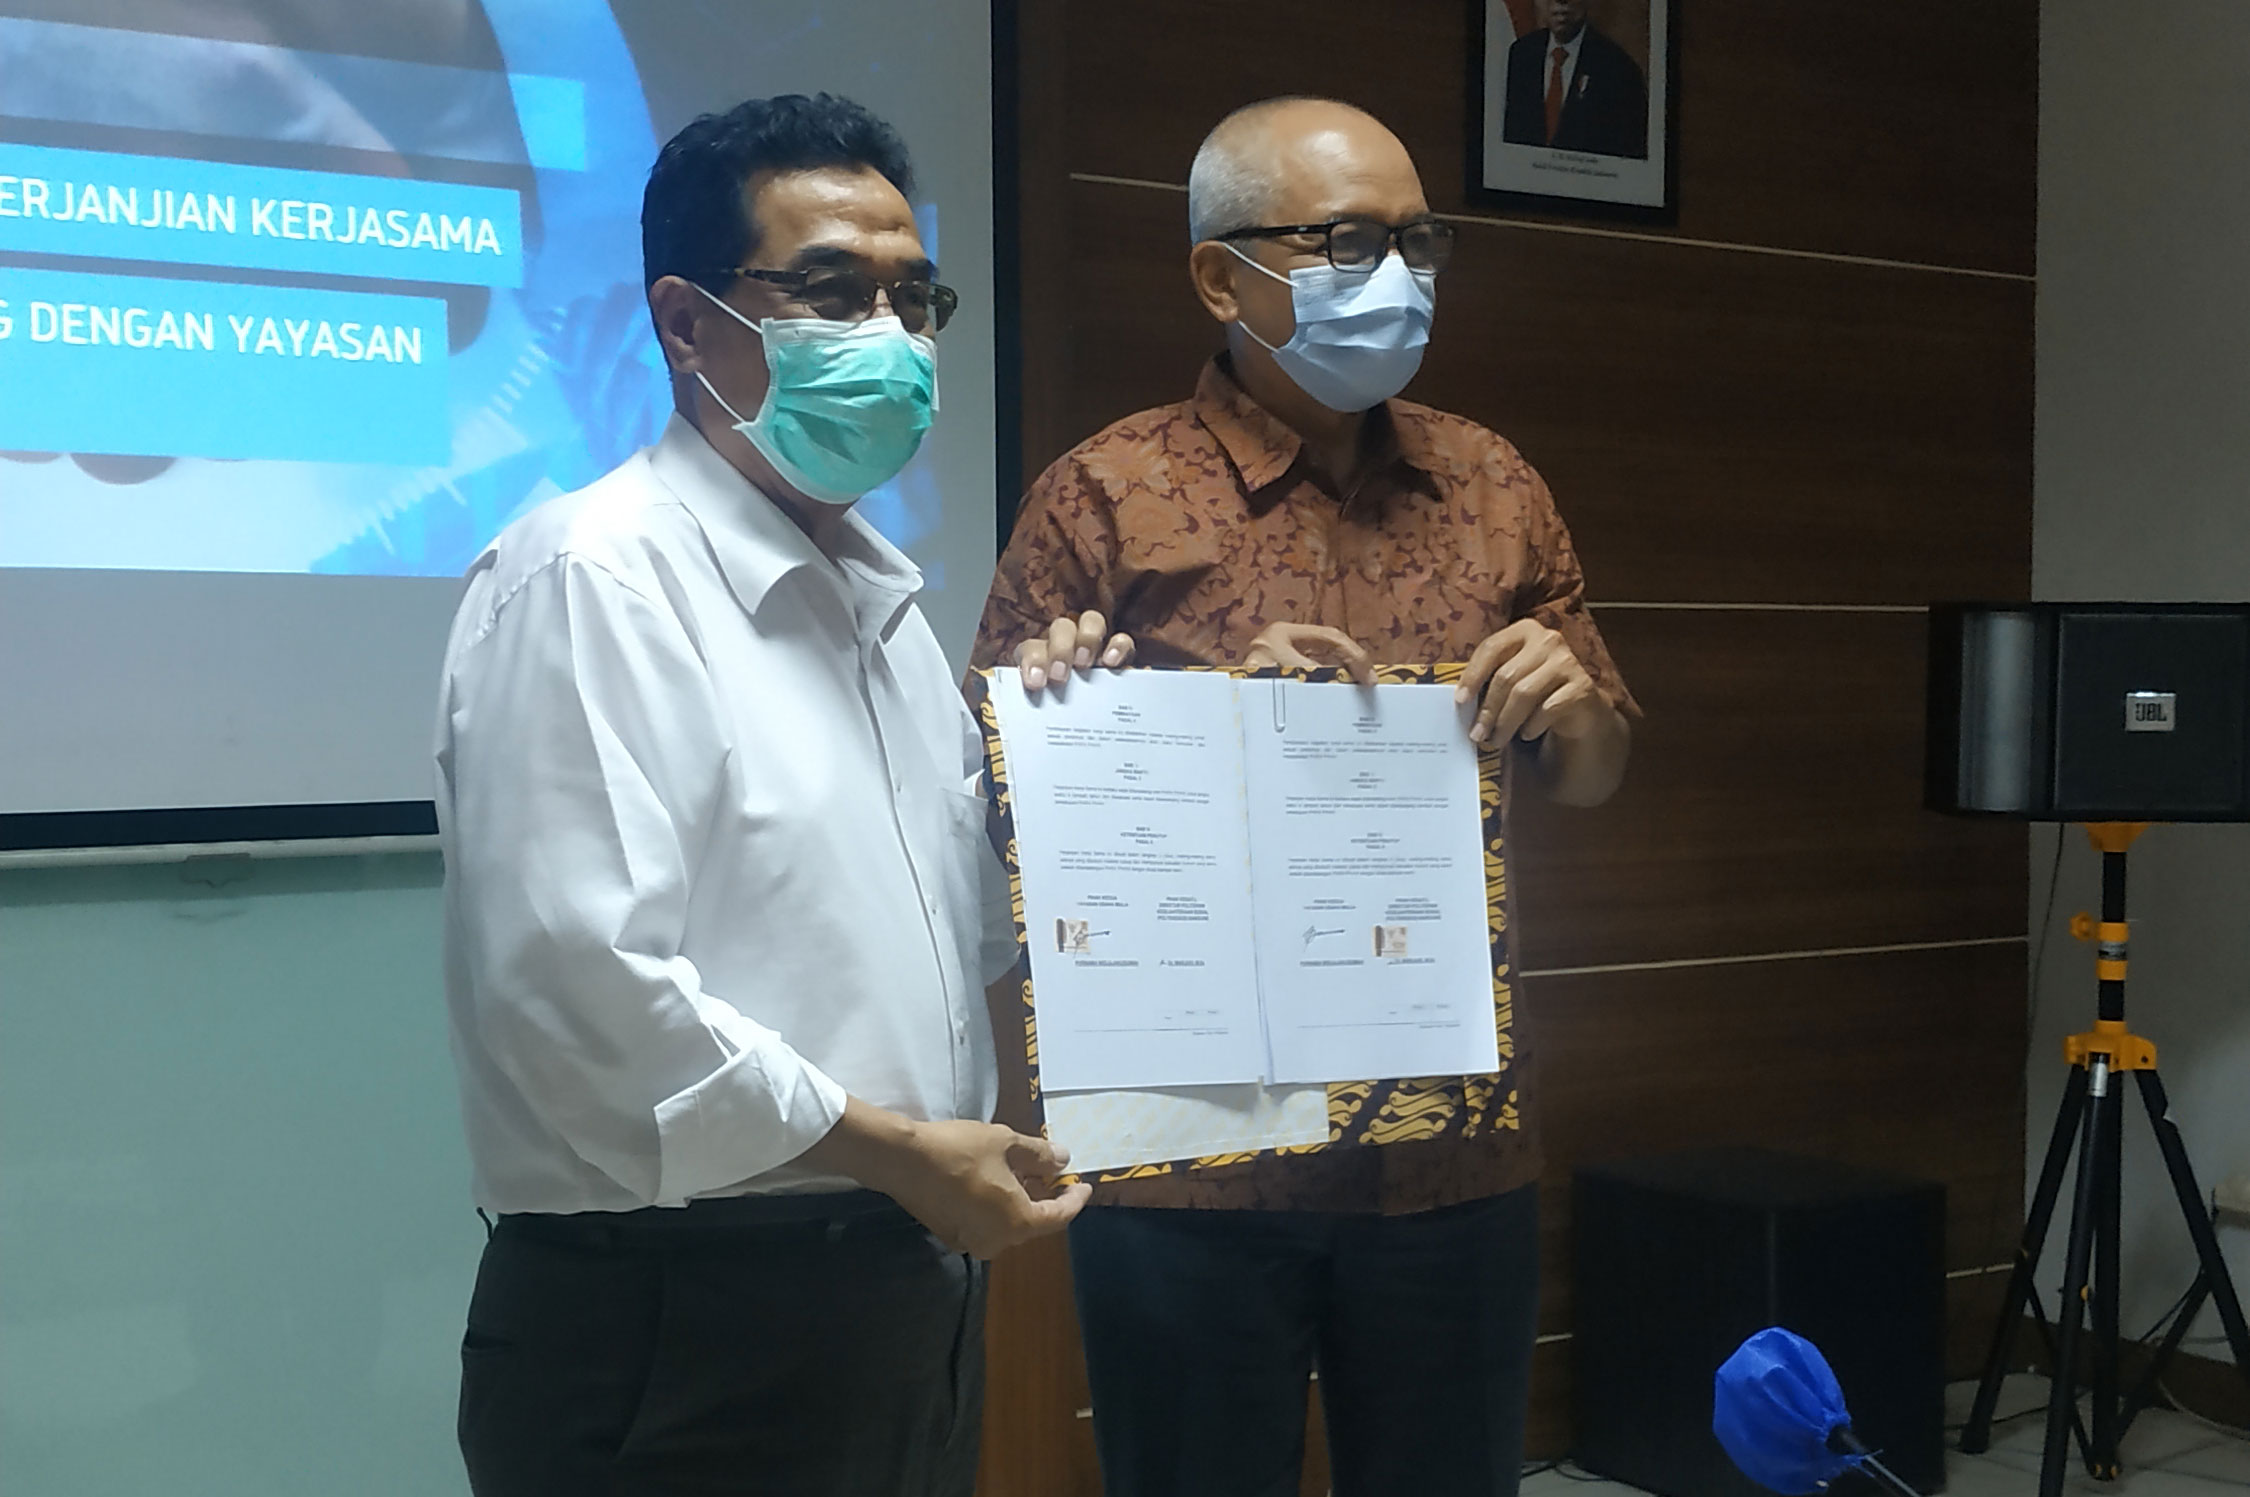 On December 13th 2021, YUM signed a partnership agreement with Politeknik Kesejahteraan Sosial (Poltekesos) Bandung. The collaboration includes capacity building of YUM's staff, student internships and implementation of field practice.